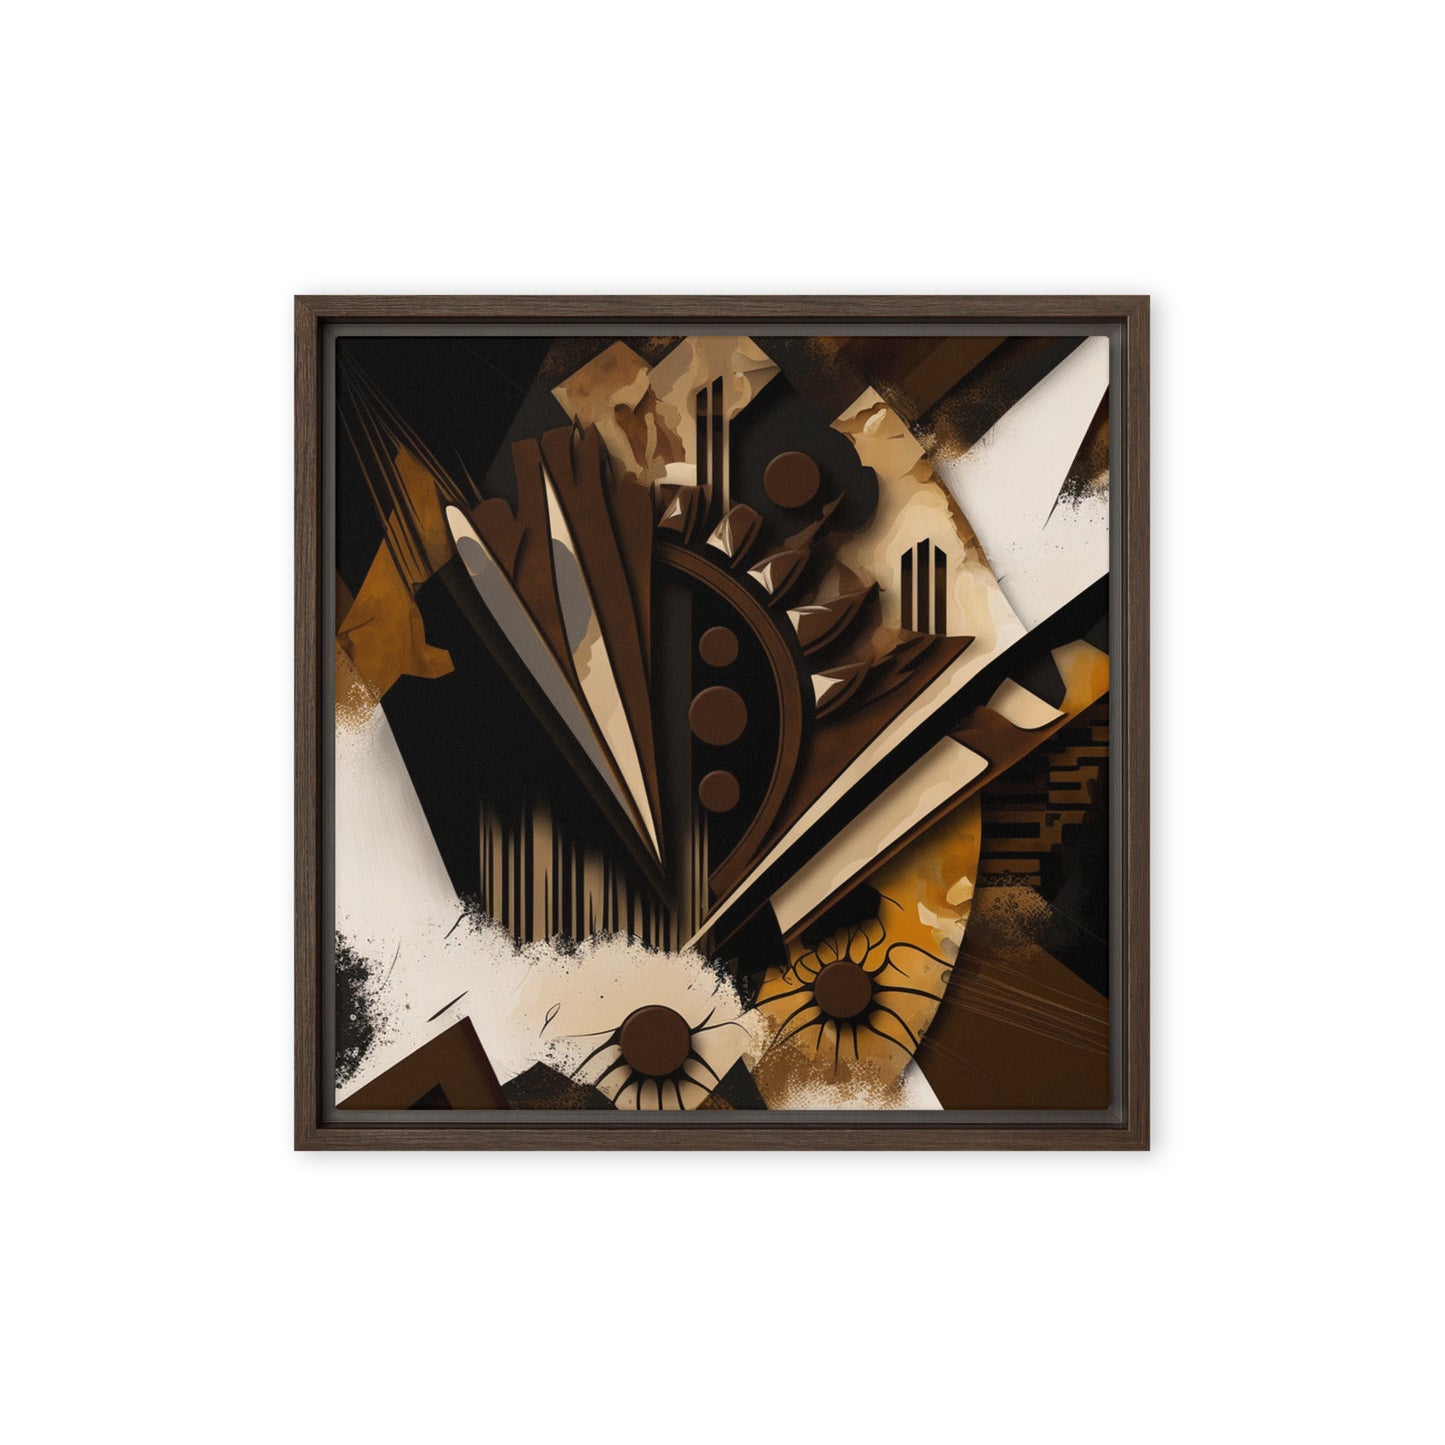 'RESILIENCE' abstract African design: Framed canvas art